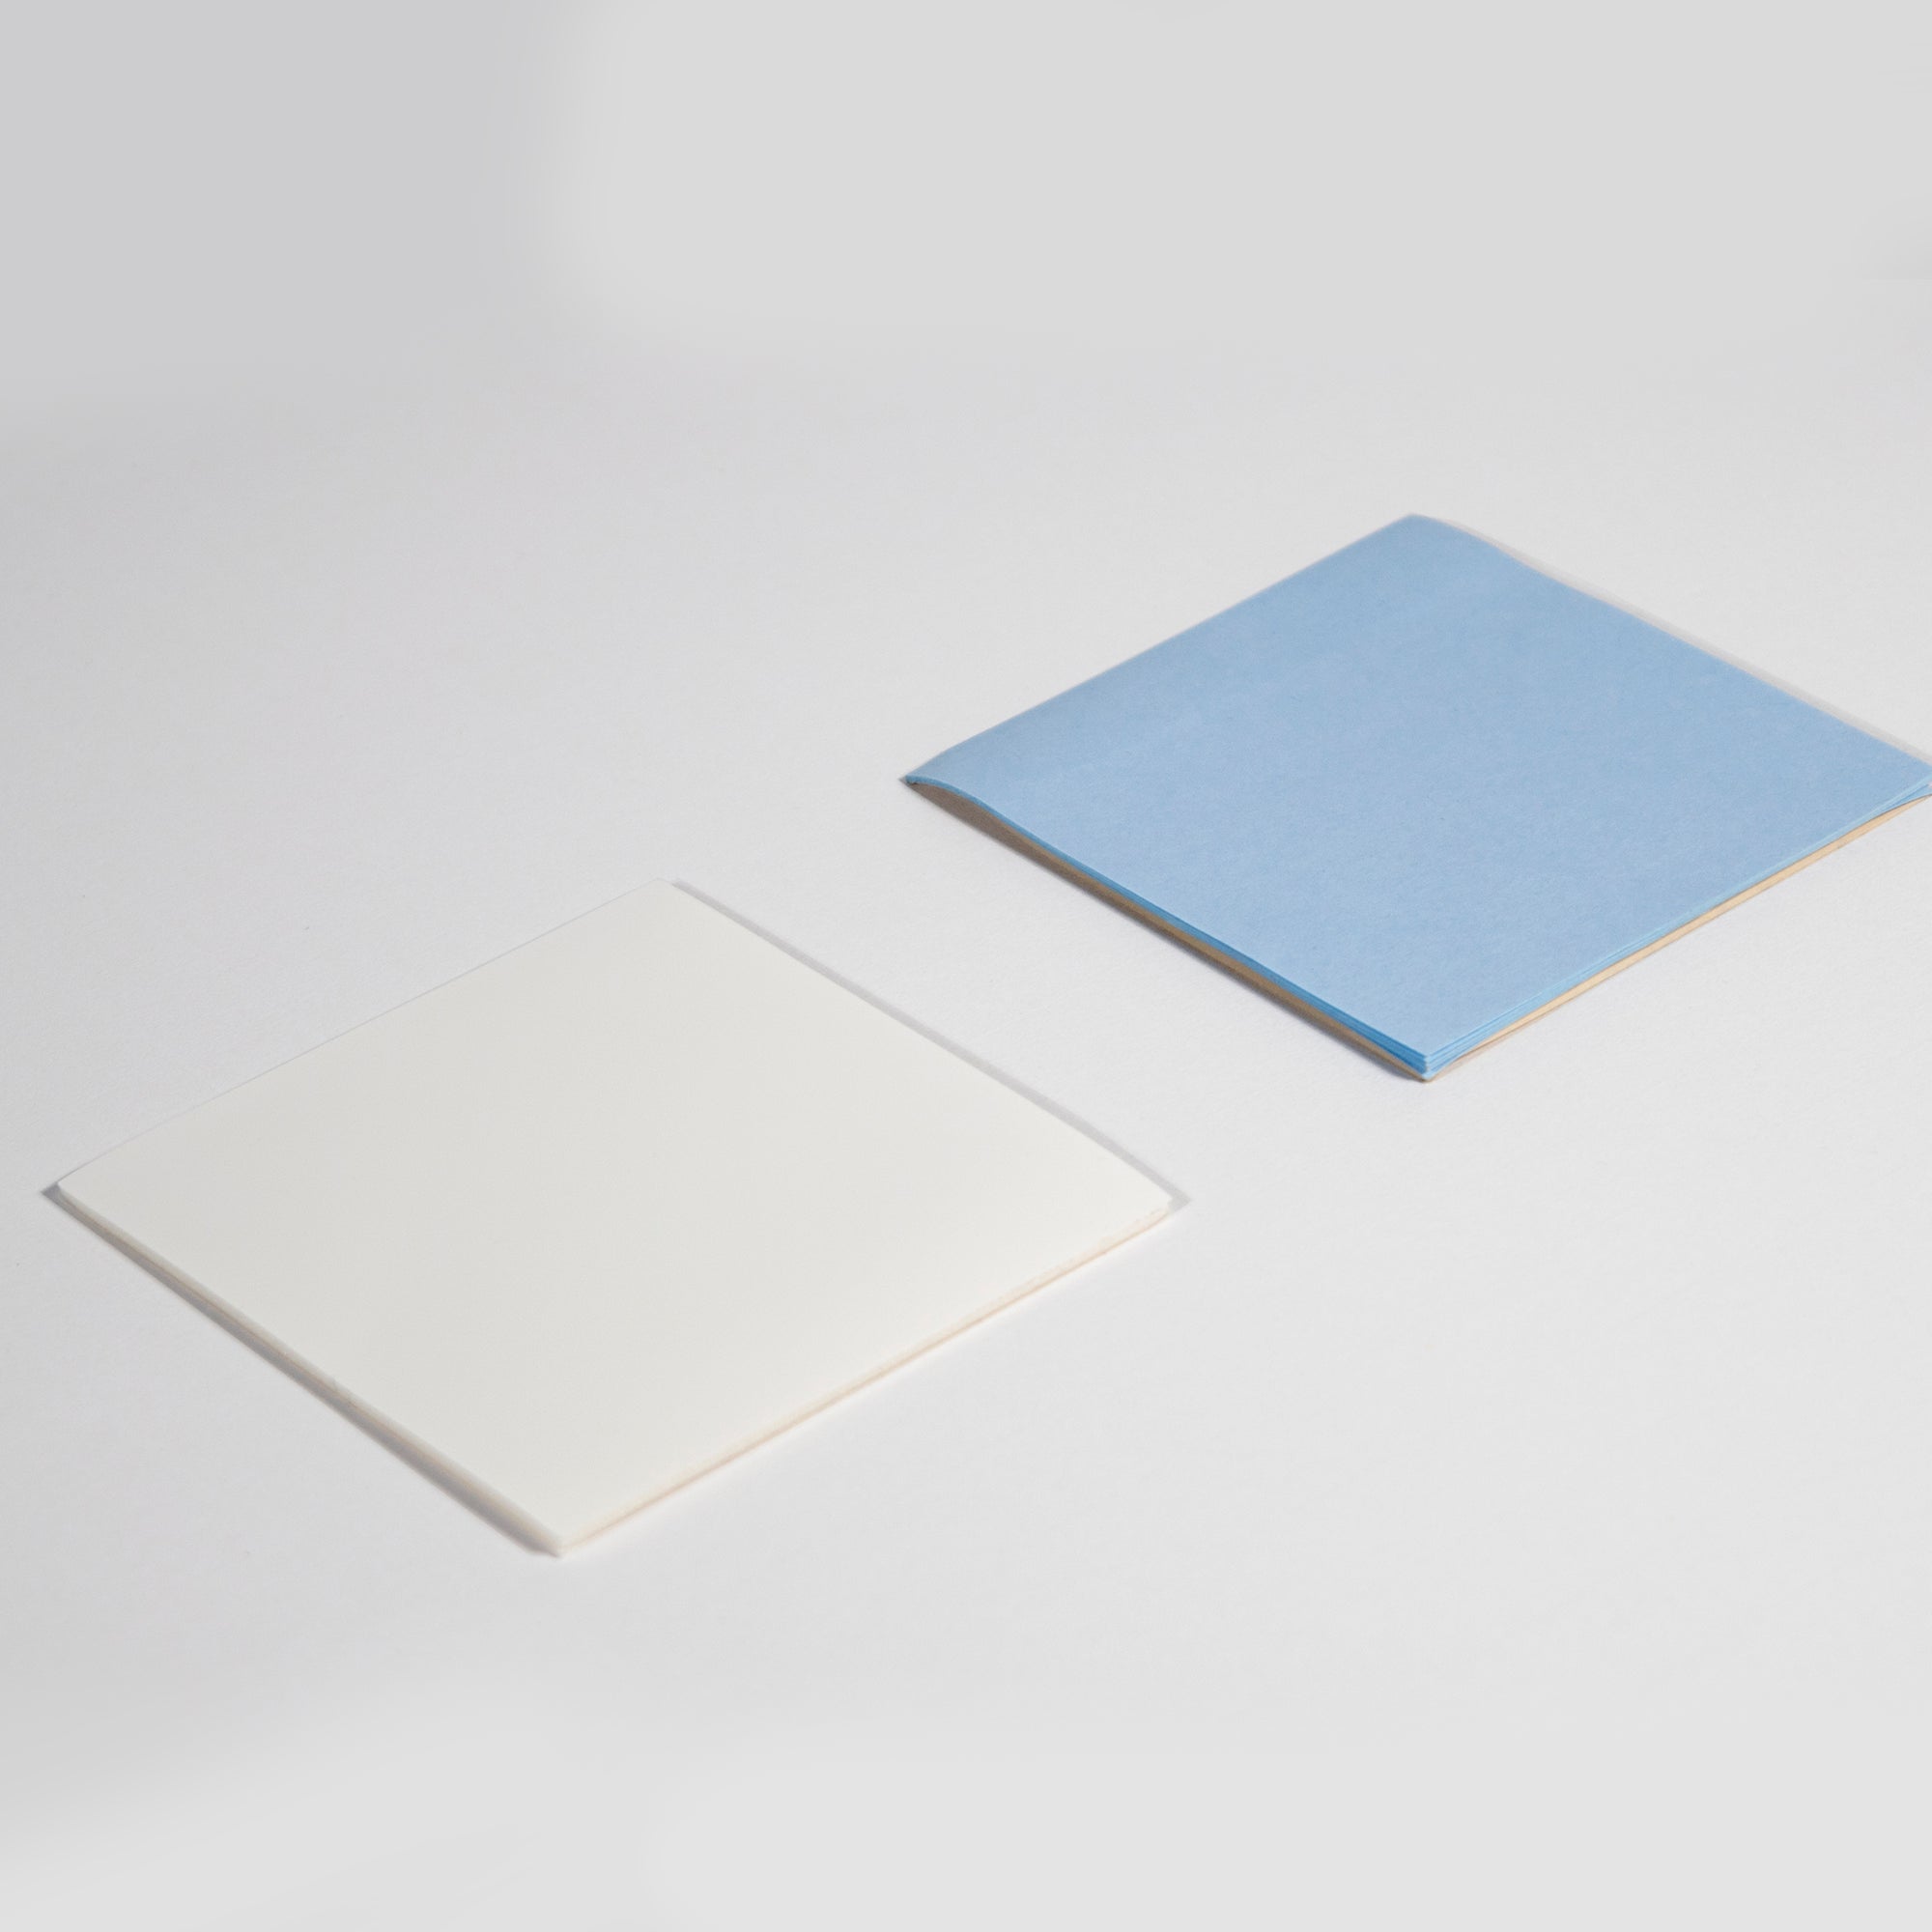 Reusable Dry-Erase Sticky Pads for any non-textured surface. Shown compare to standard post it note. 